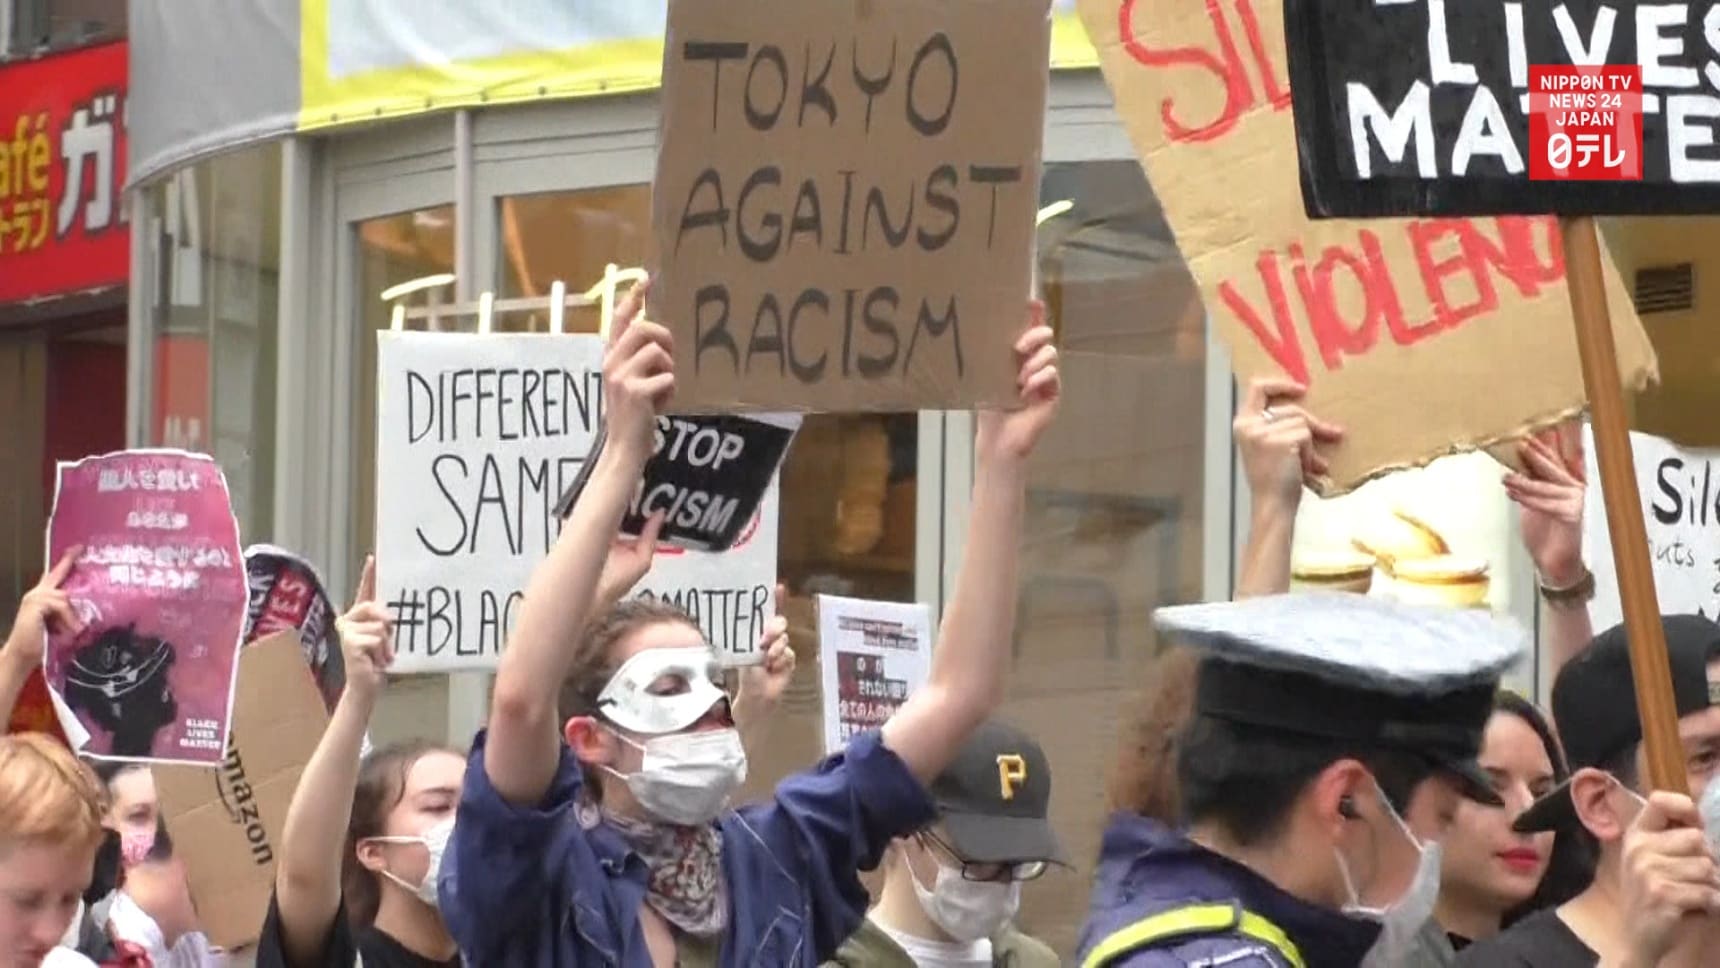 Thousands of BLM Protestors Gather in Tokyo